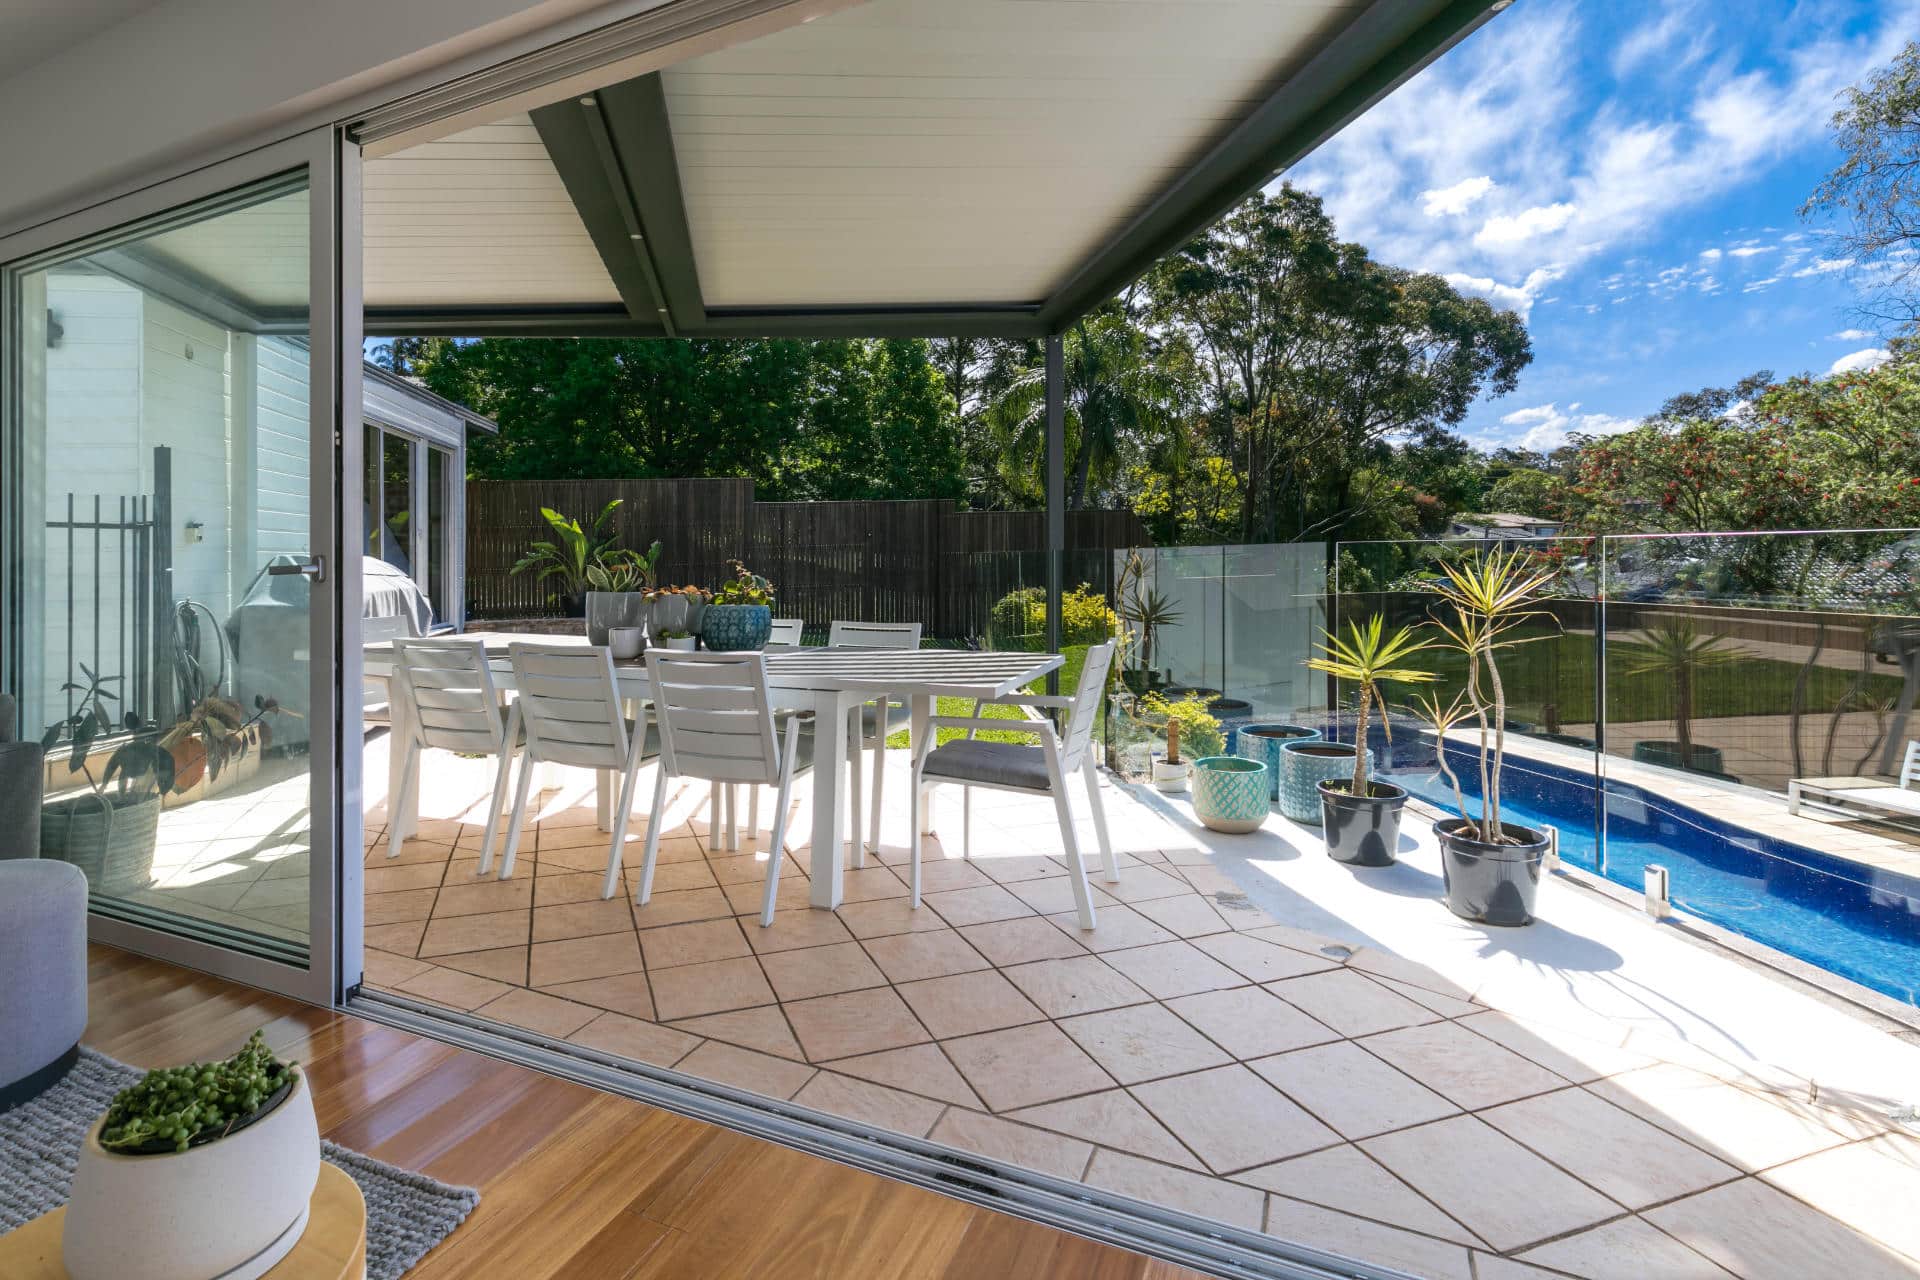 Closed louvres on Frenchs Forest pergola during the day.